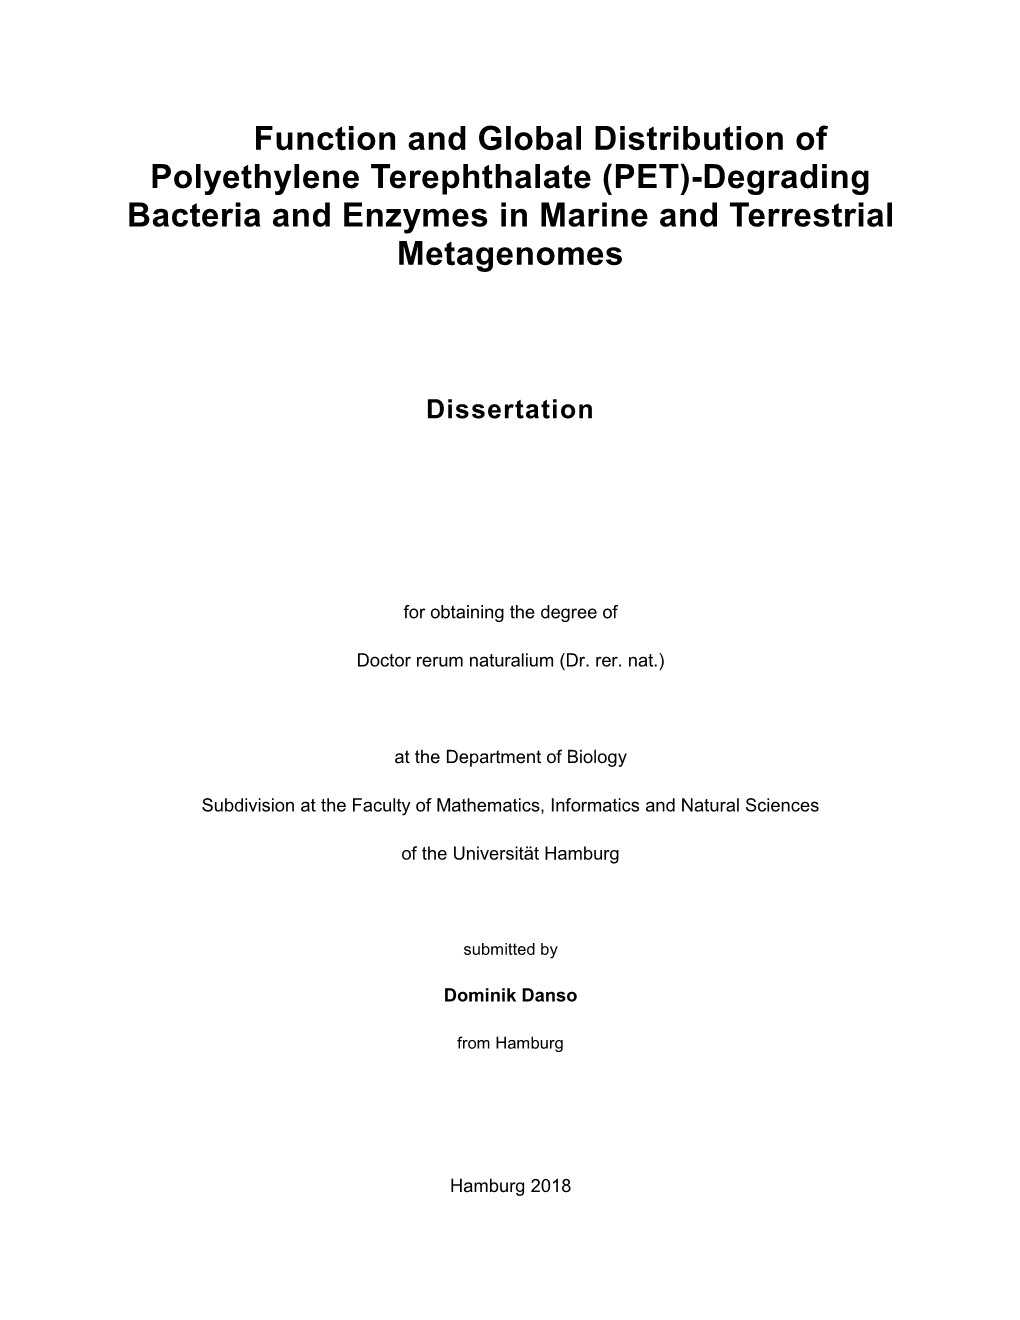 Function and Global Distribution of Polyethylene Terephthalate (PET)-Degrading Bacteria and Enzymes in Marine and Terrestrial Metagenomes